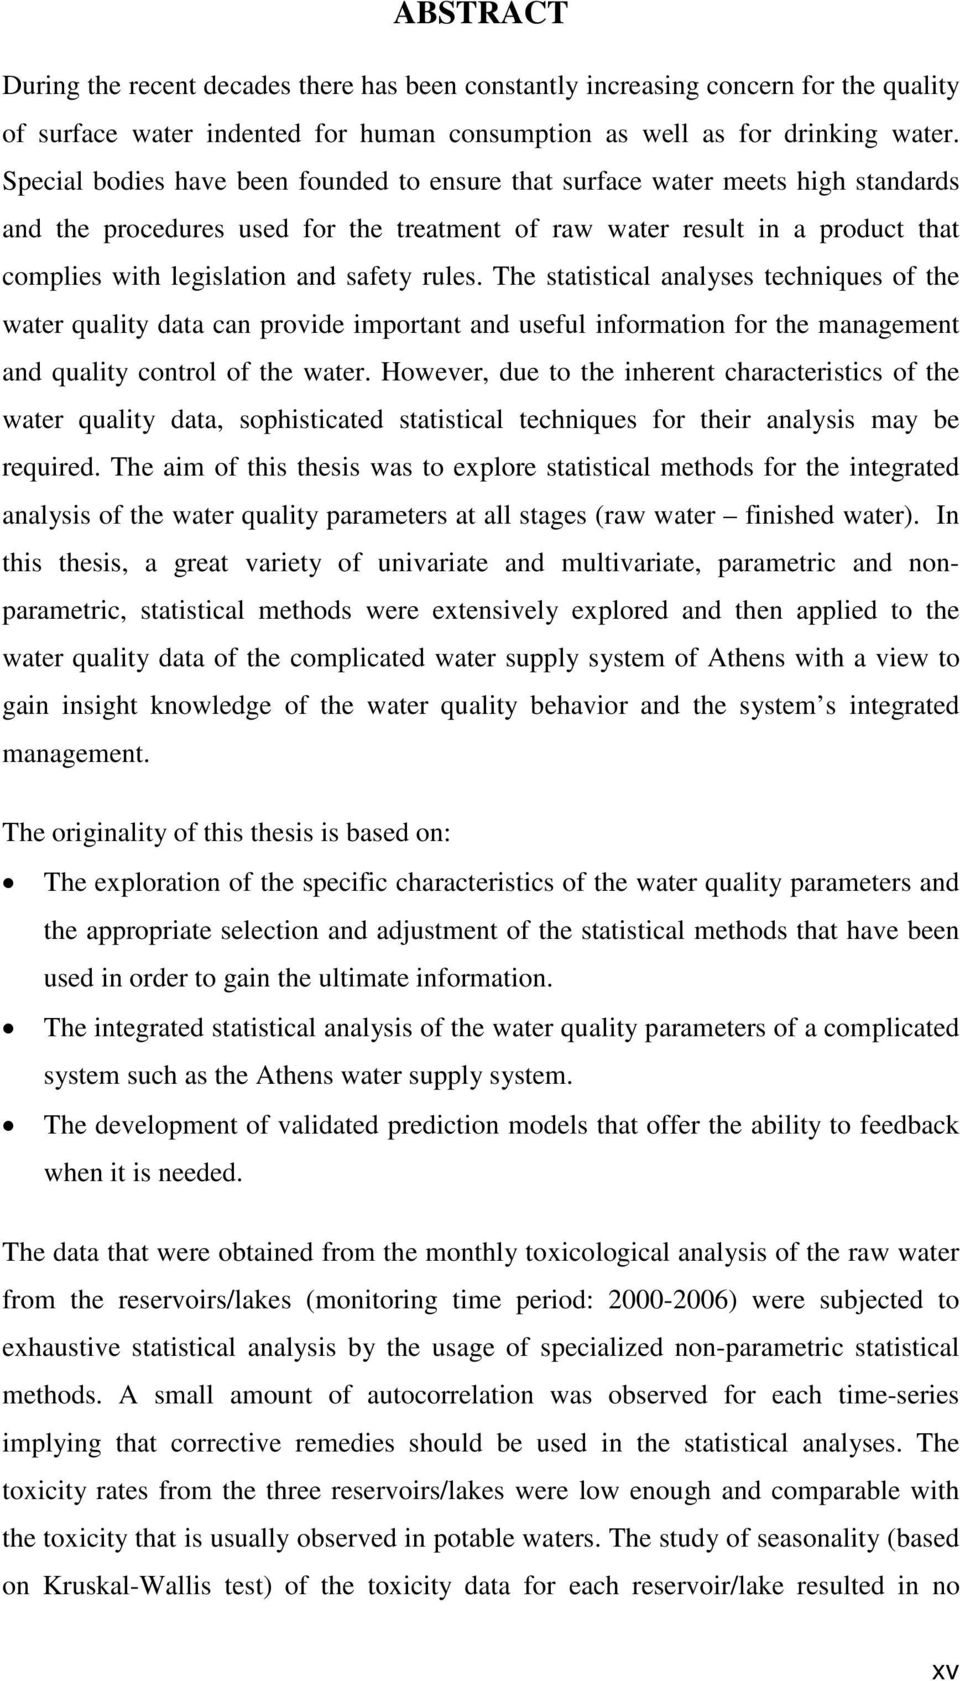 rules. The statistical analyses techniques of the water quality data can provide important and useful information for the management and quality control of the water.